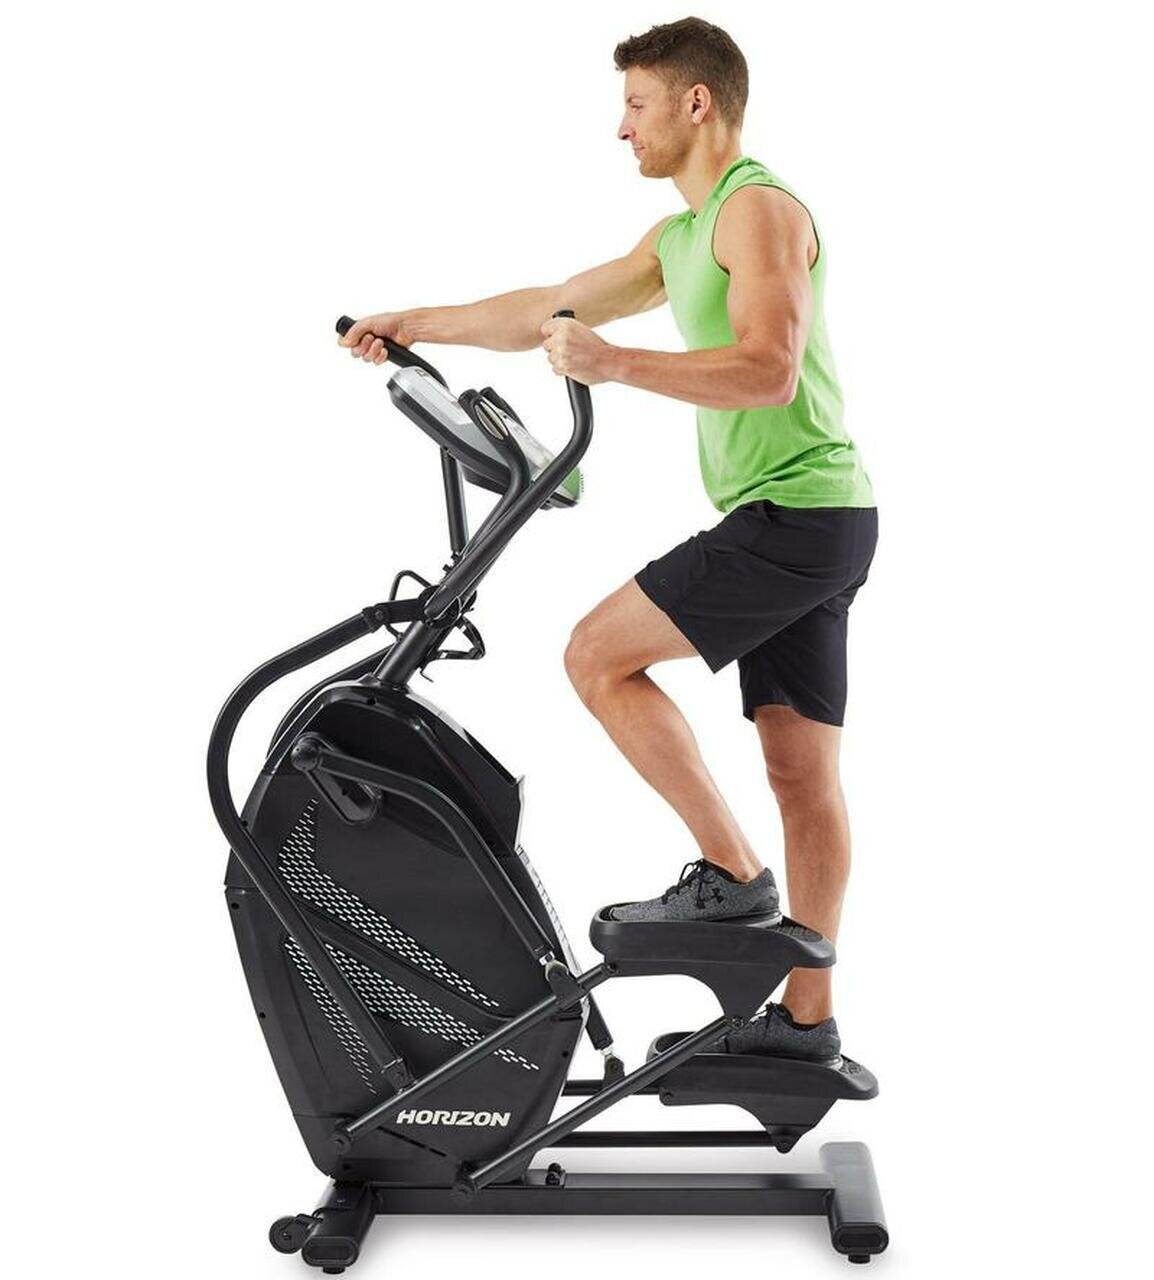 Buy HT5.0 & Online Stepper - AfterPay - Trainer Available! 1800-370-766 ZipPay Horizon - Ph: Peak